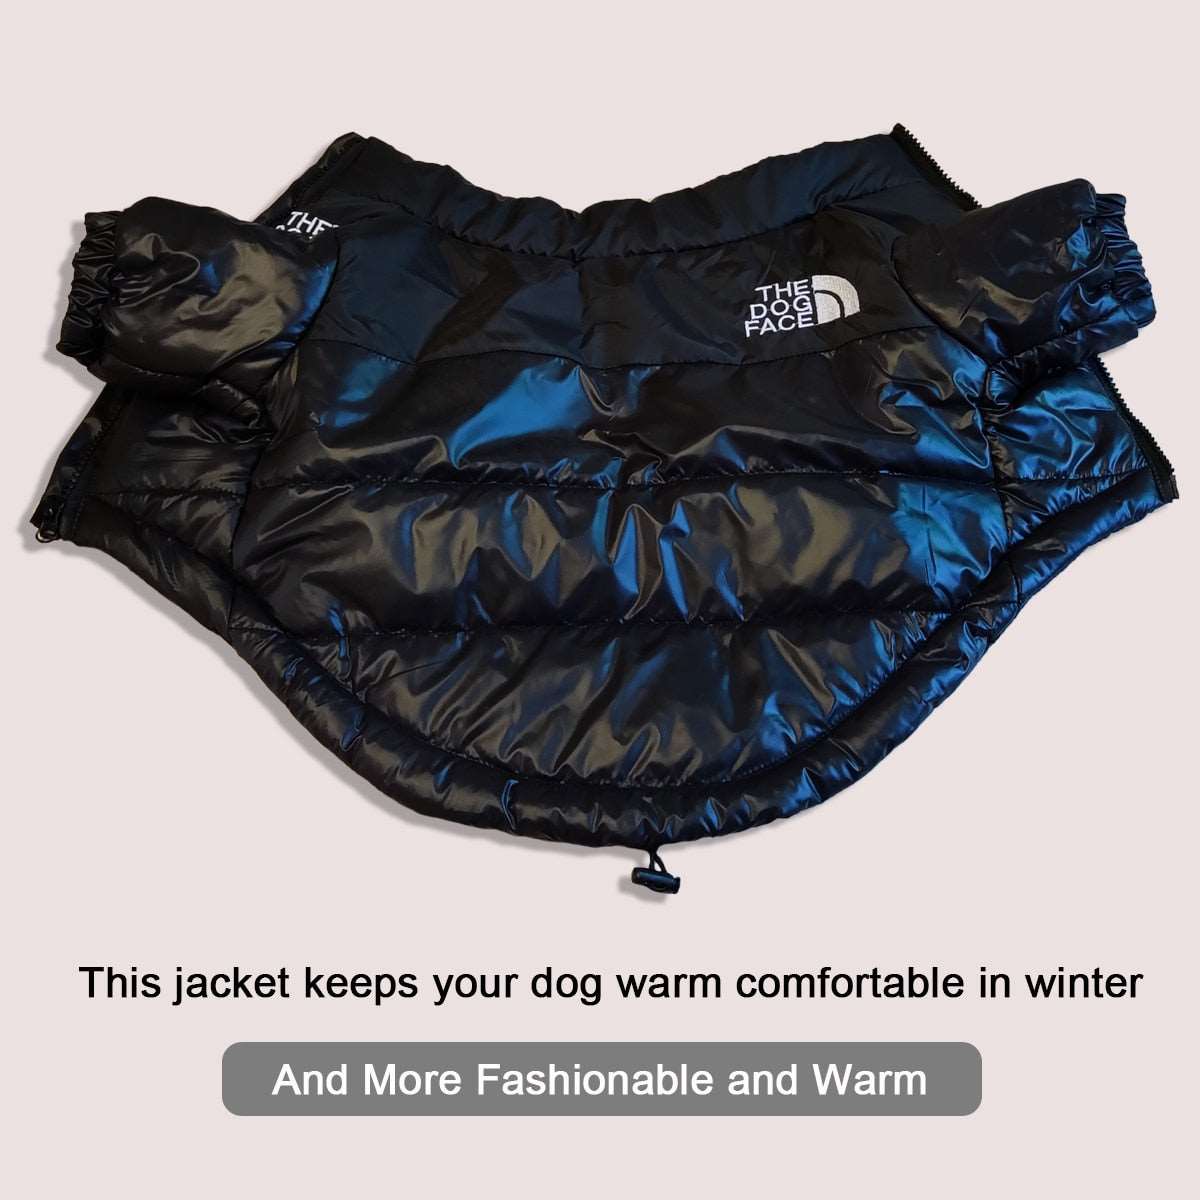 Warm Dog Jackets for dogs